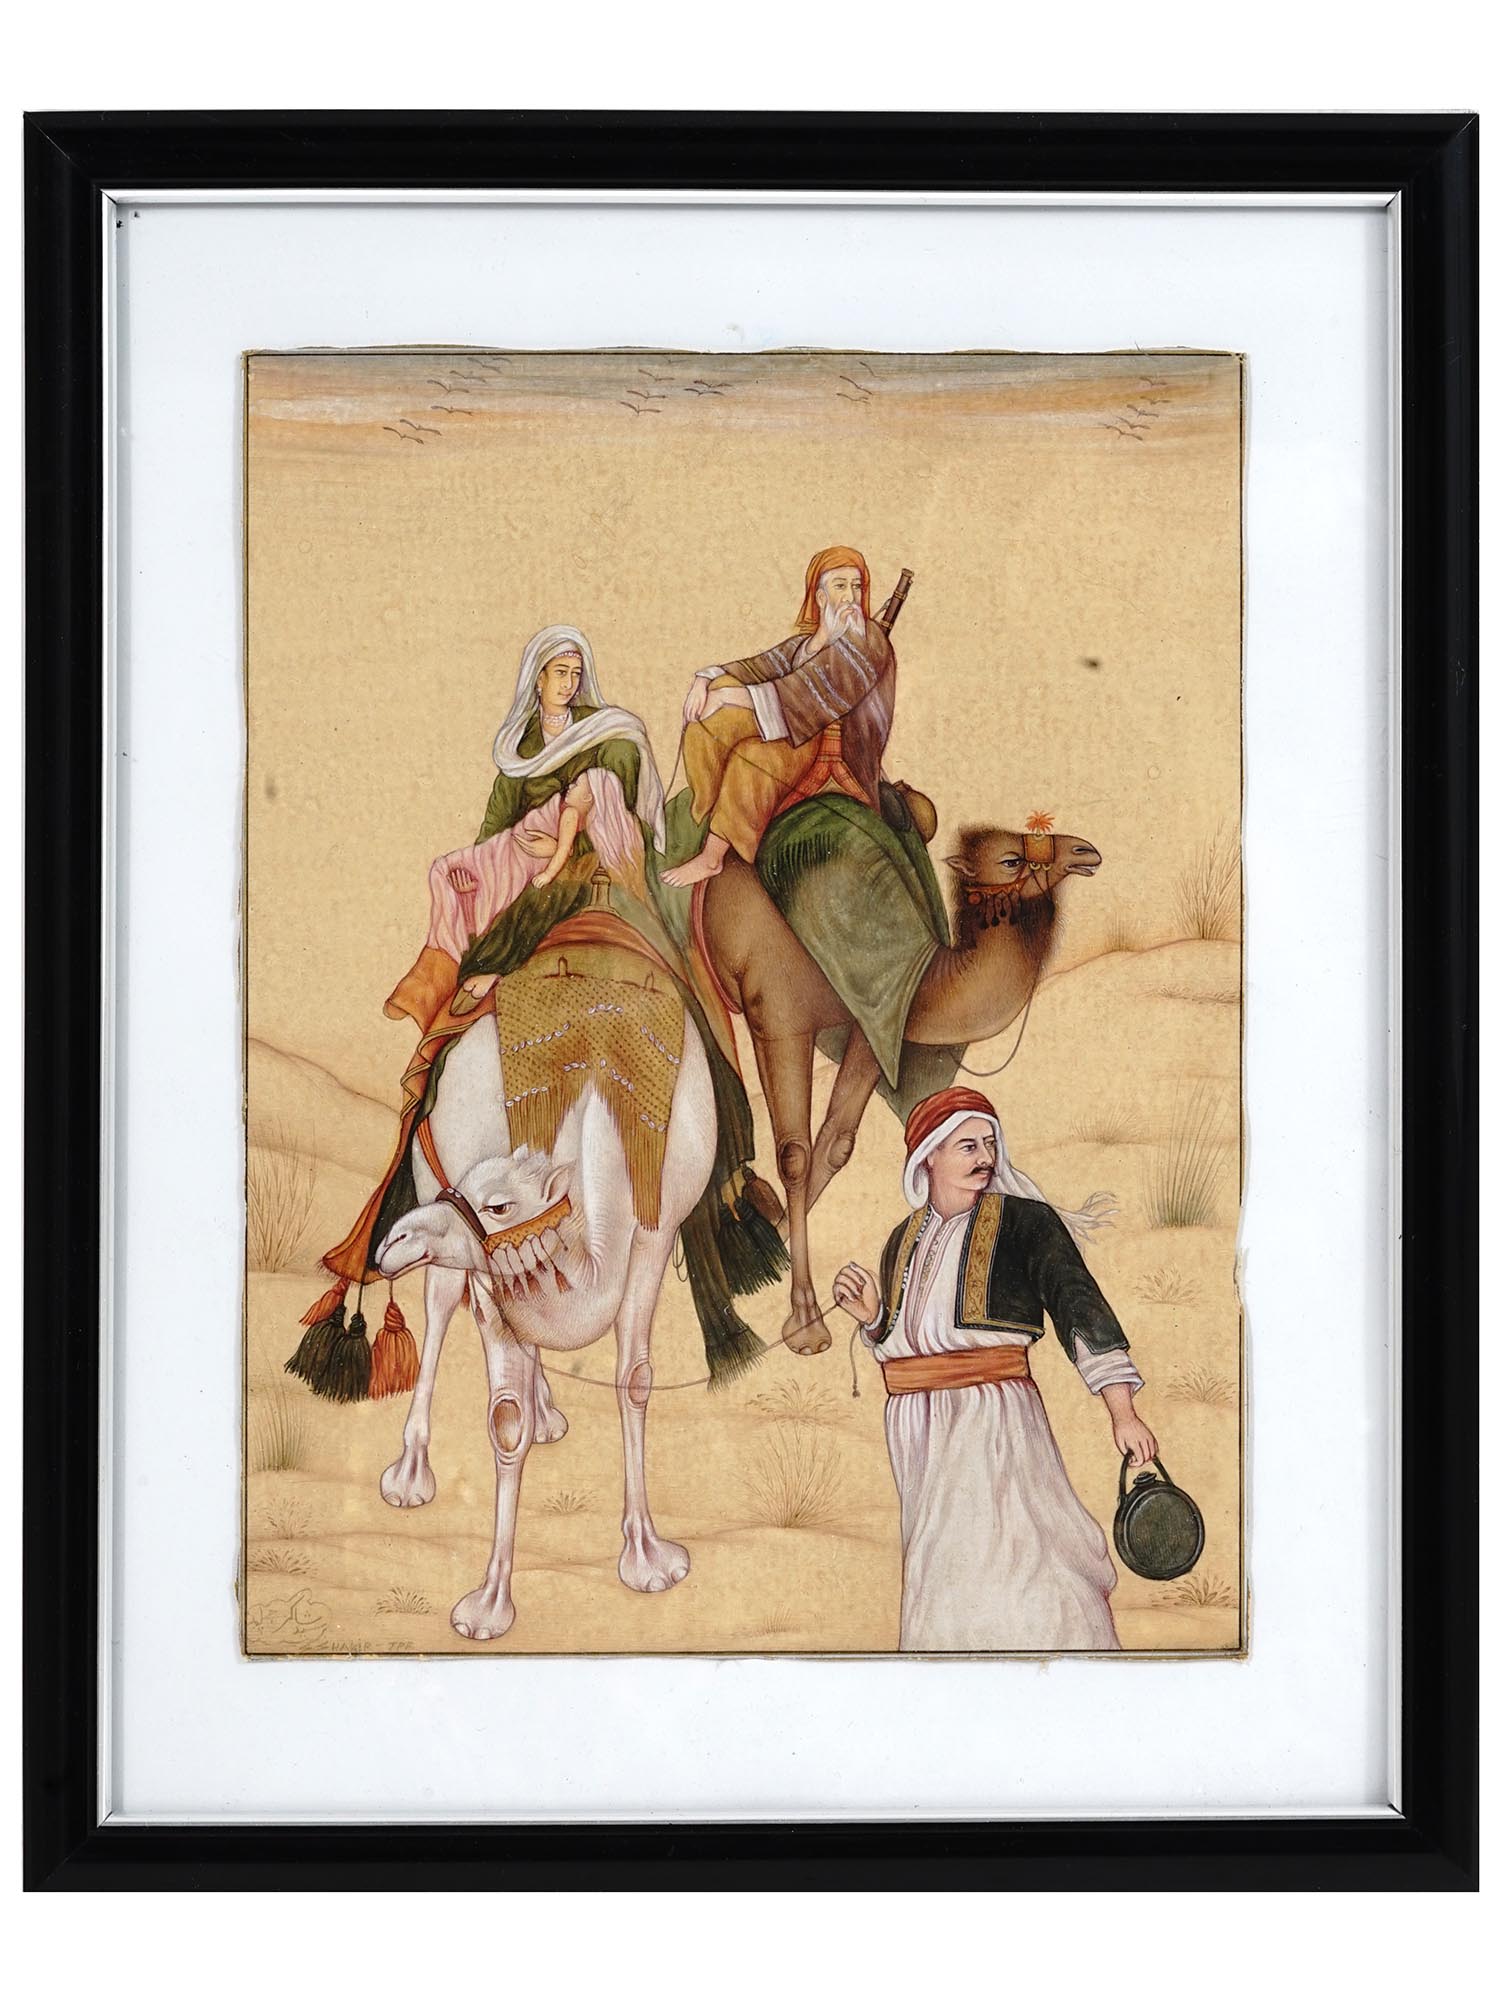 FRAMED INDIAN MINIATURE PAINTING BY S. SHAKIR ALI PIC-0